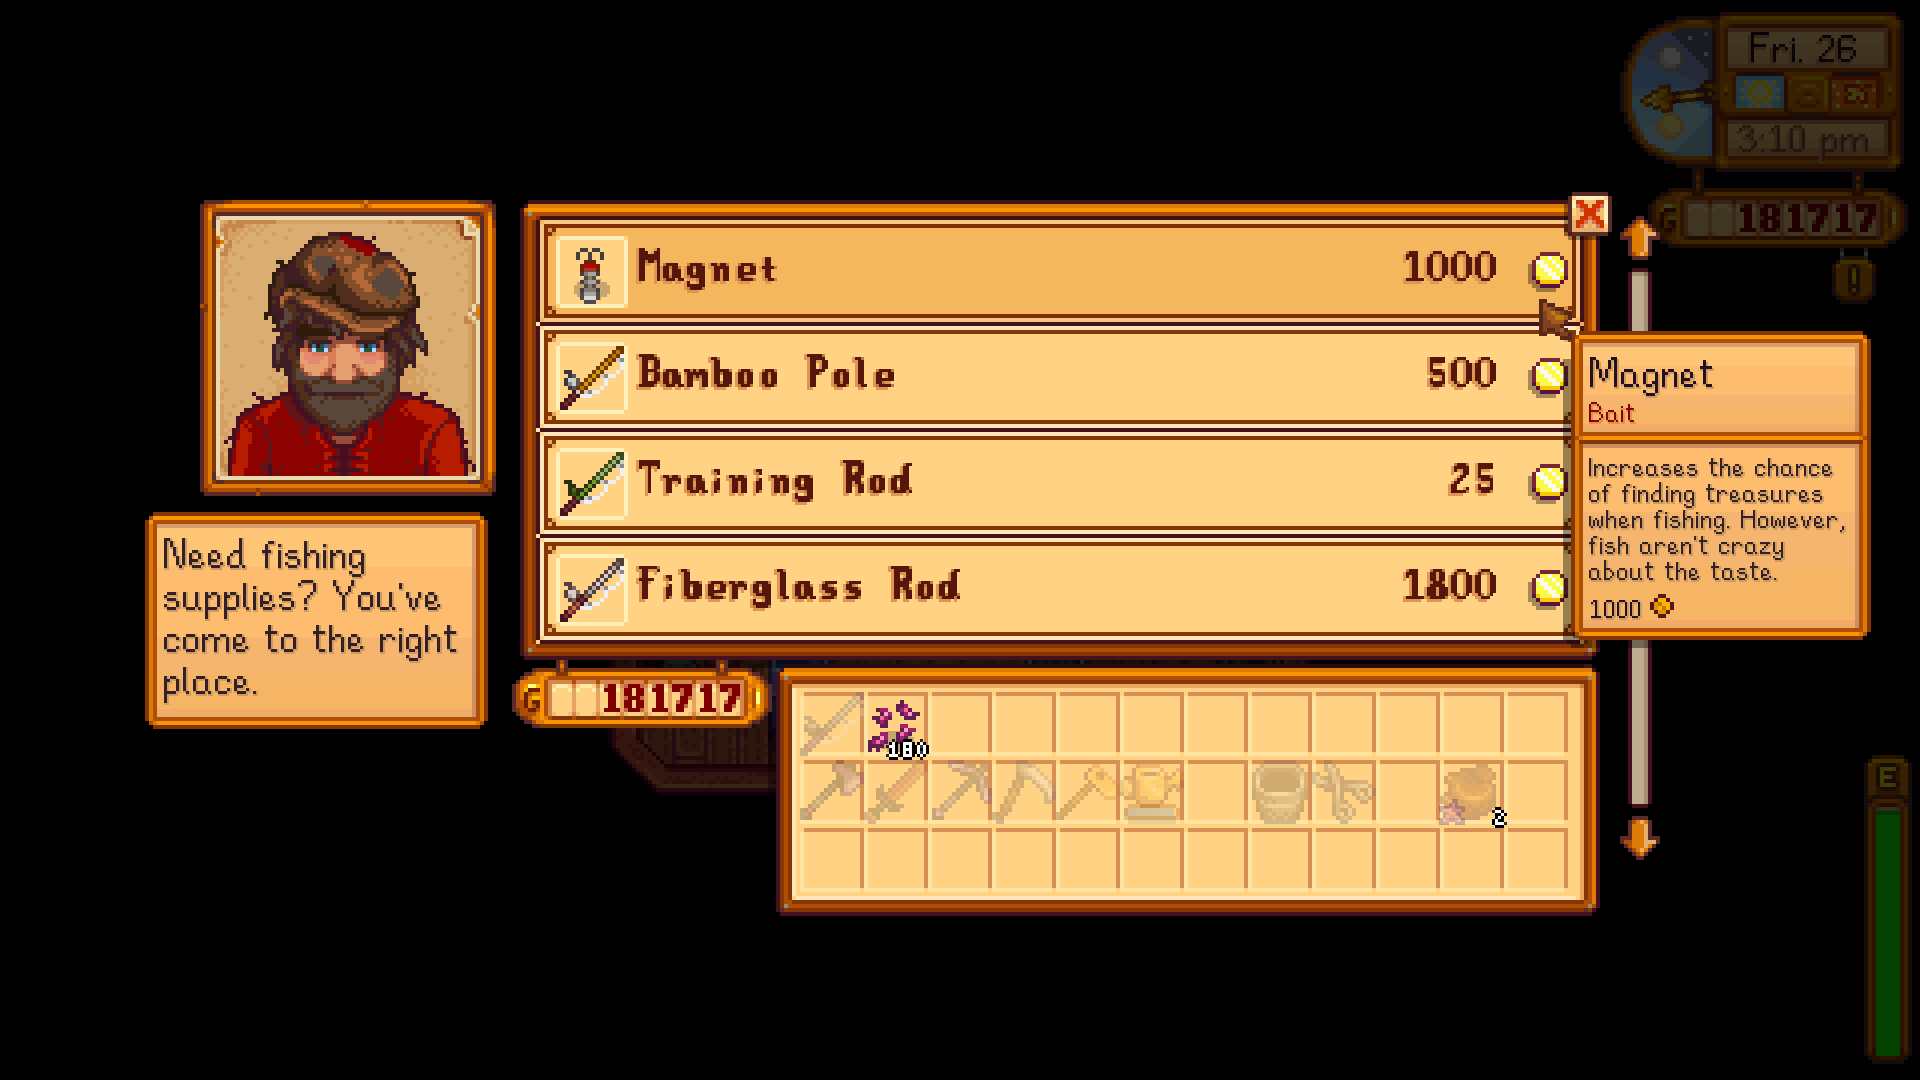 Buying a magnet from Willy in Stardew Valley.